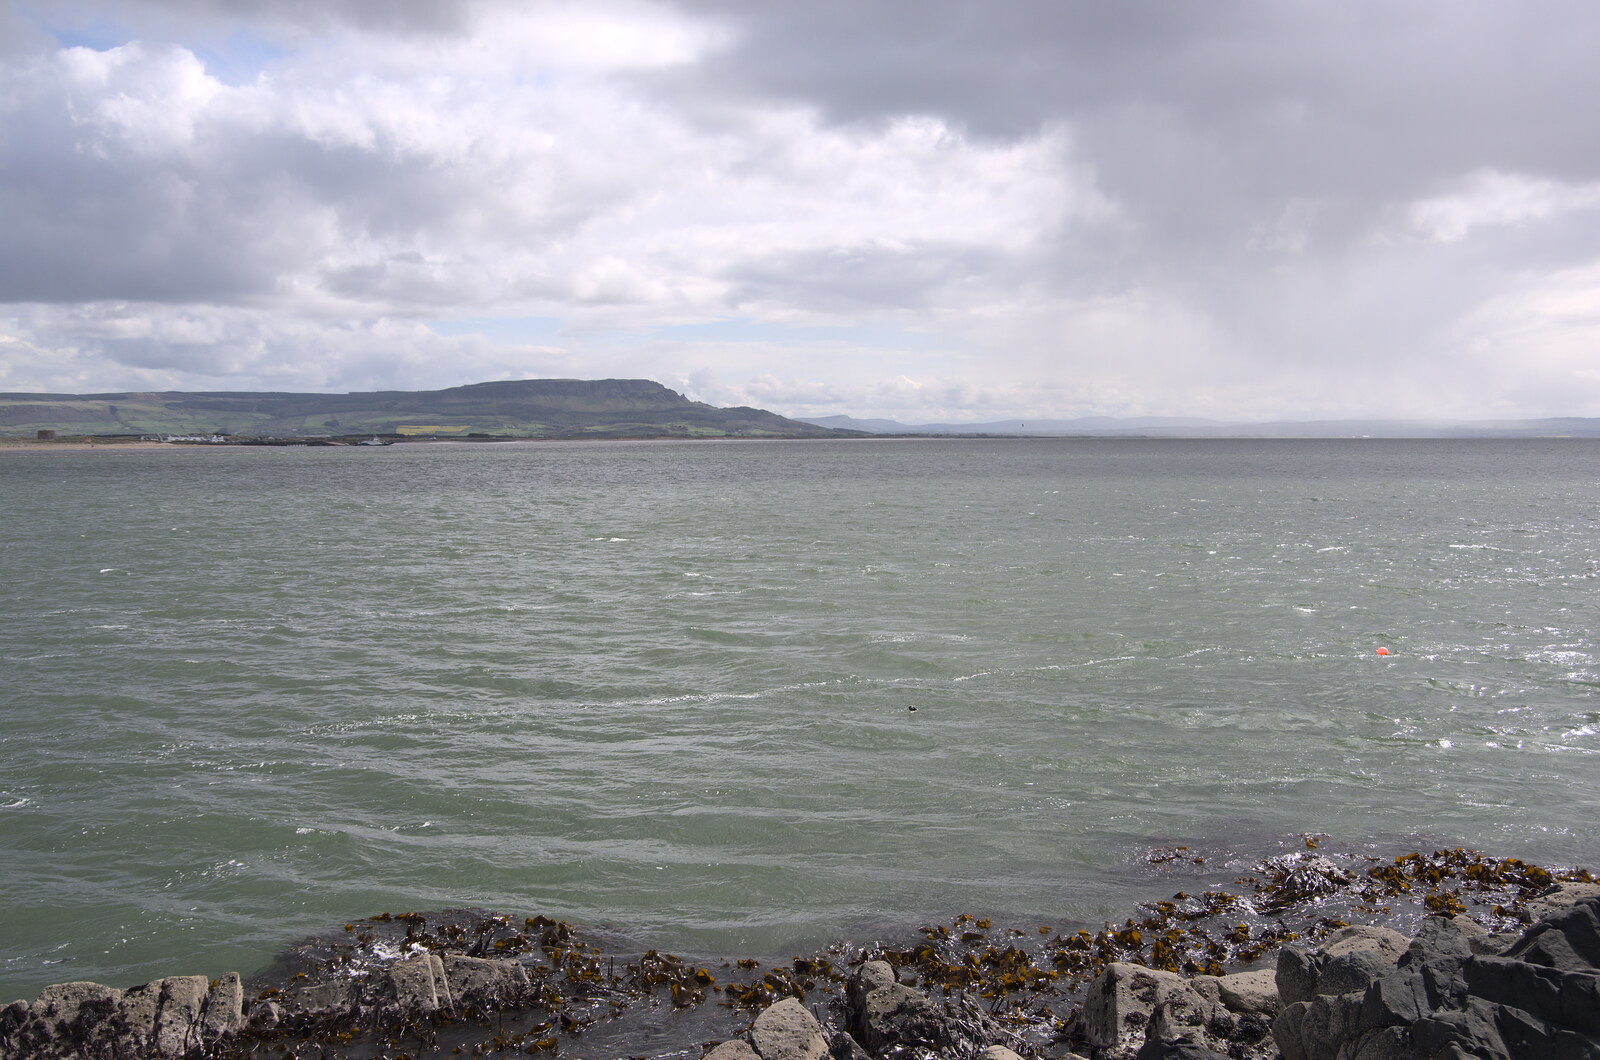 Greencastle, Doagh and Malin Head, County Donegal, Ireland - 19th April 2022: A view over Lough Foyle